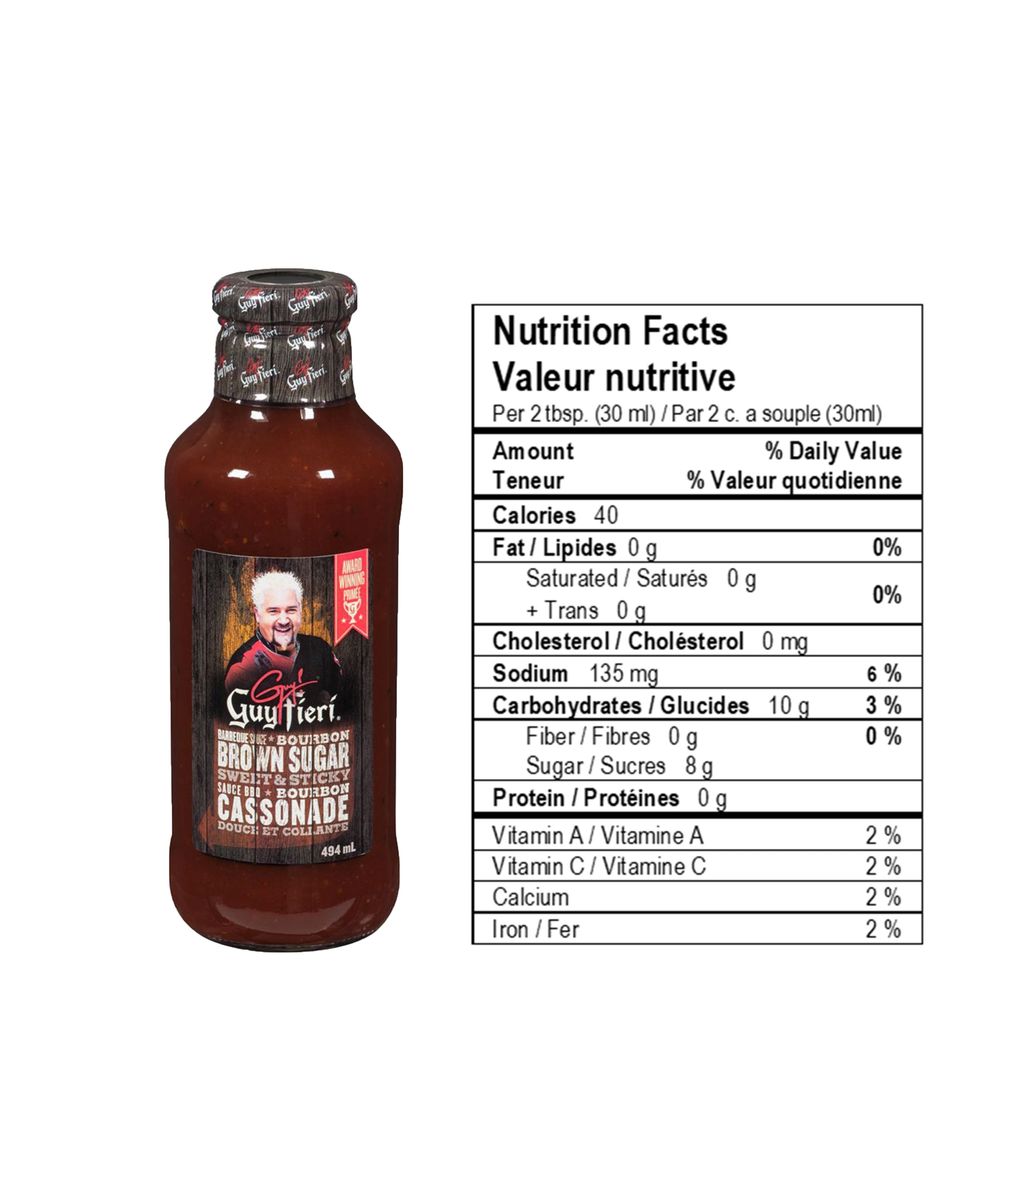 Guy Fieri Sweet & Sticky Bourbon Brown Sugar BBQ Sauce with nutrition facts